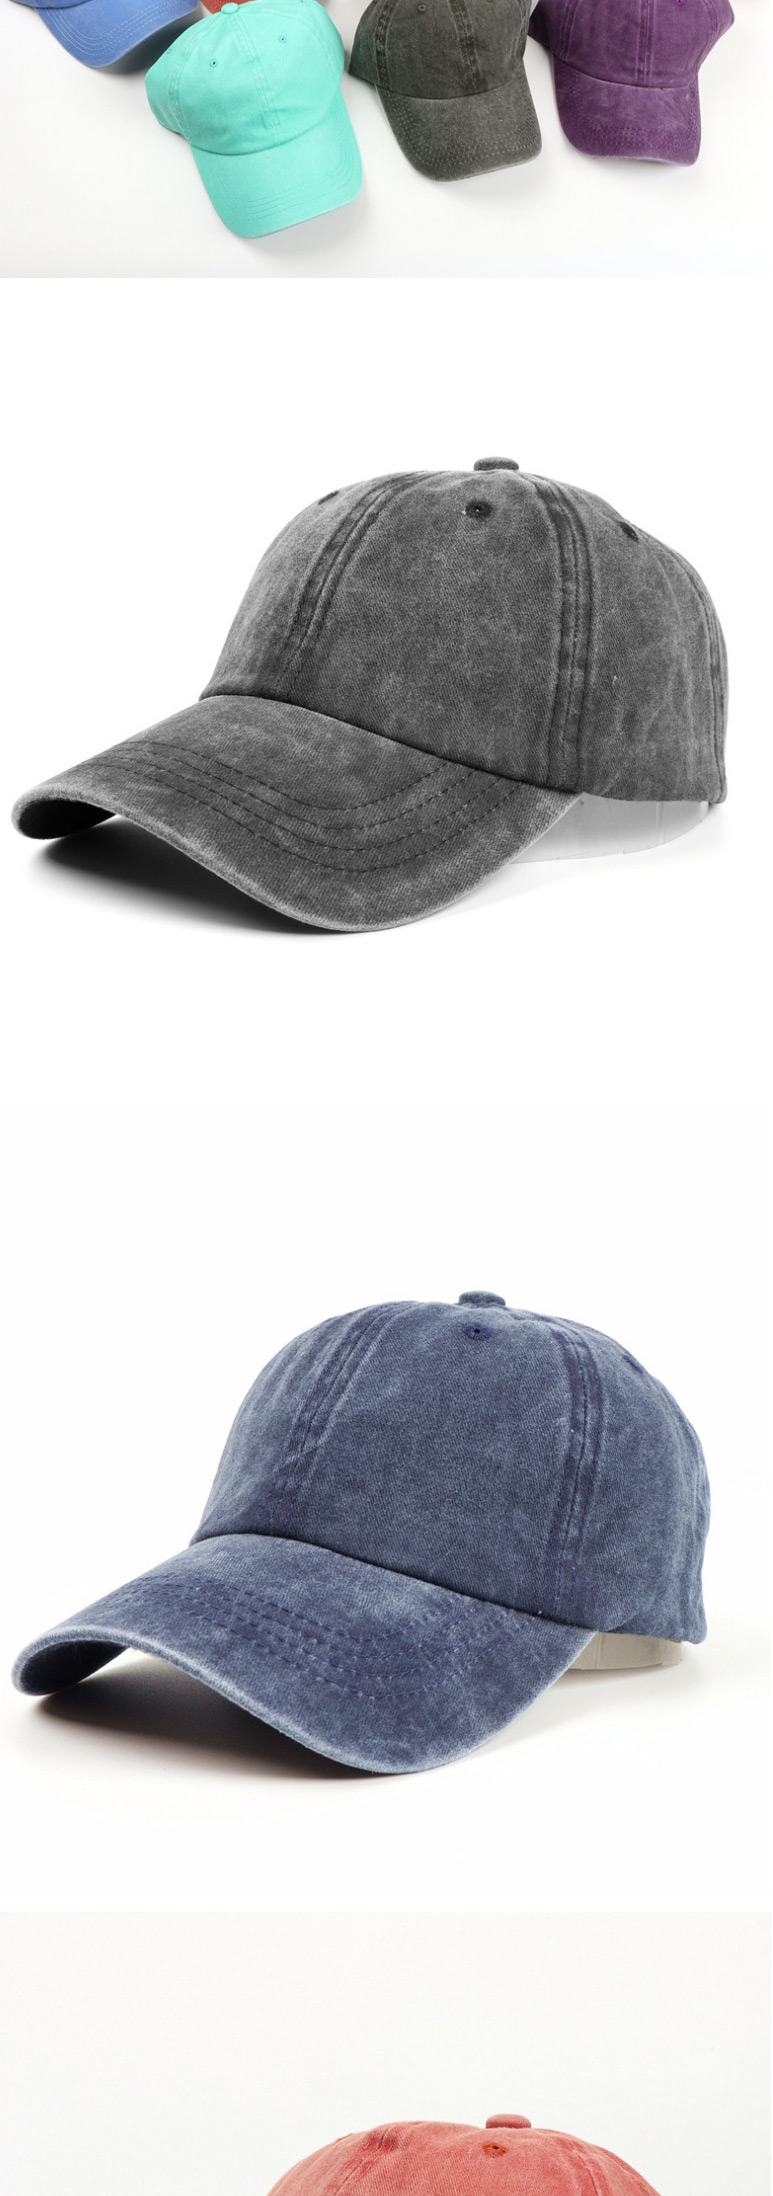 Fashion Black Gray Washed Distressed Denim Soft Top And Curved Brim Cap,Baseball Caps